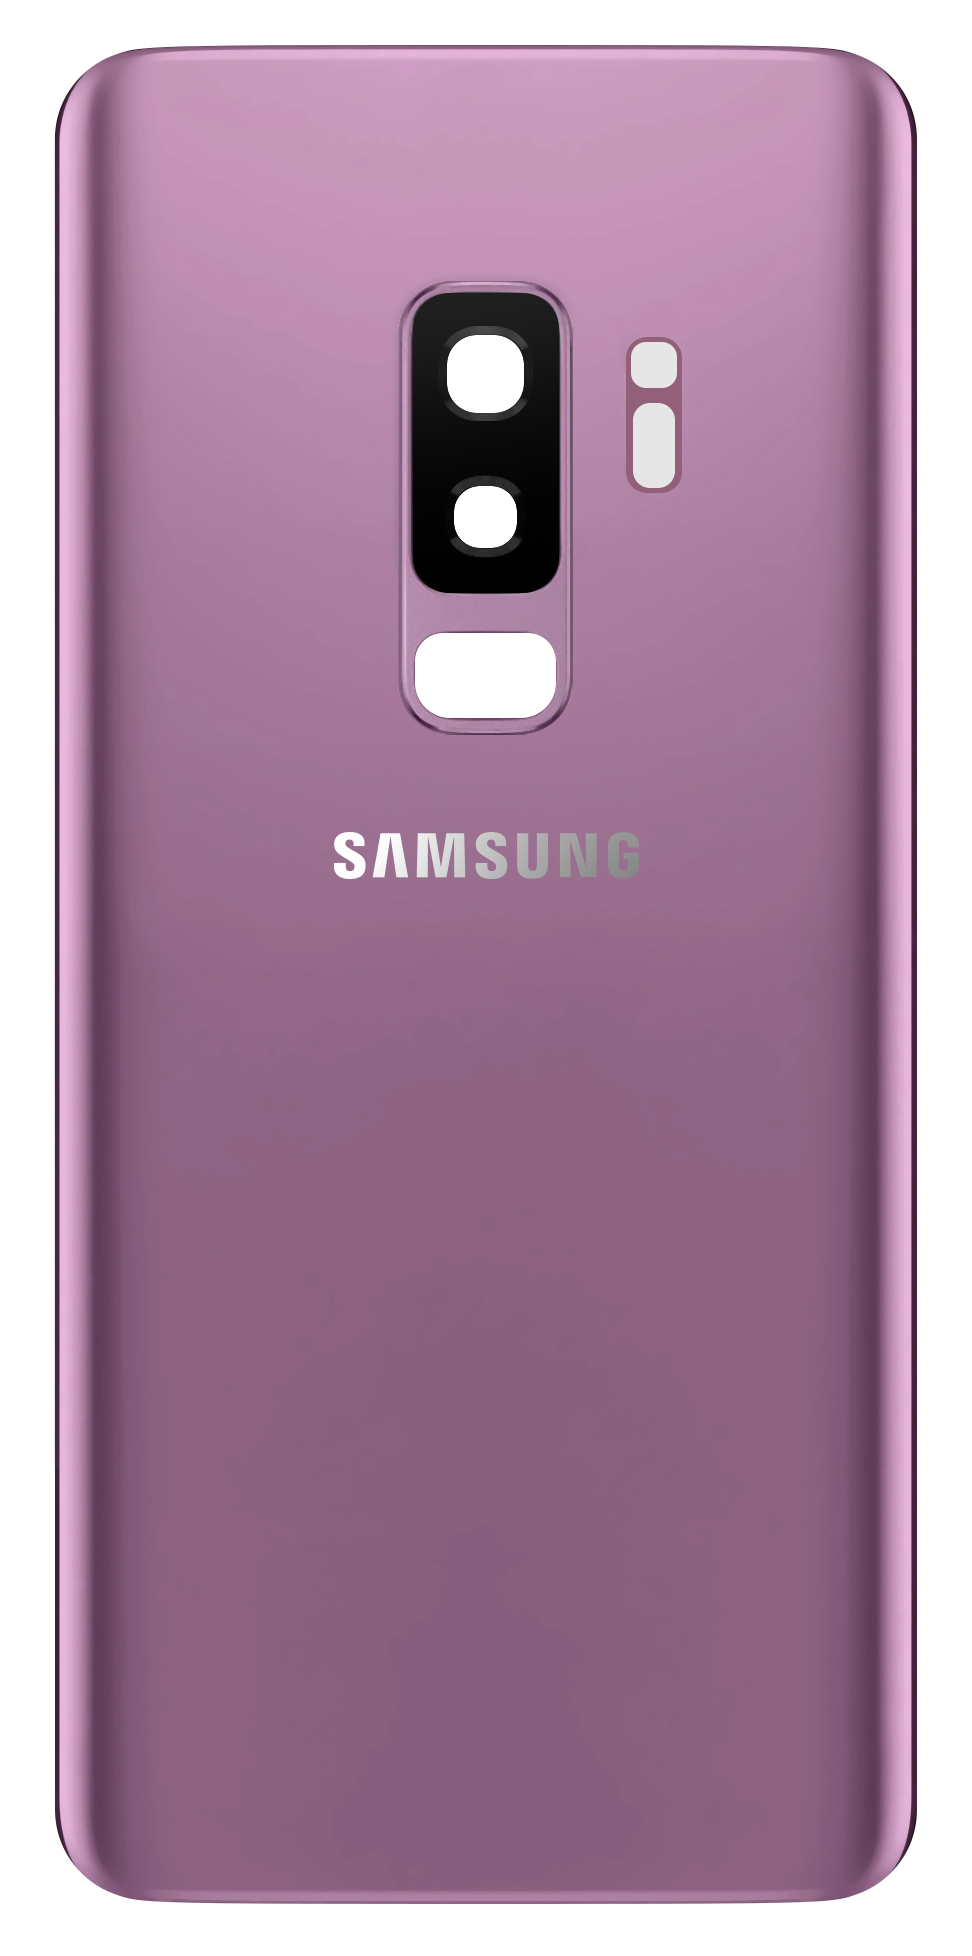 Battery Cover for Samsung Galaxy S9+ G965, Lilac Purple